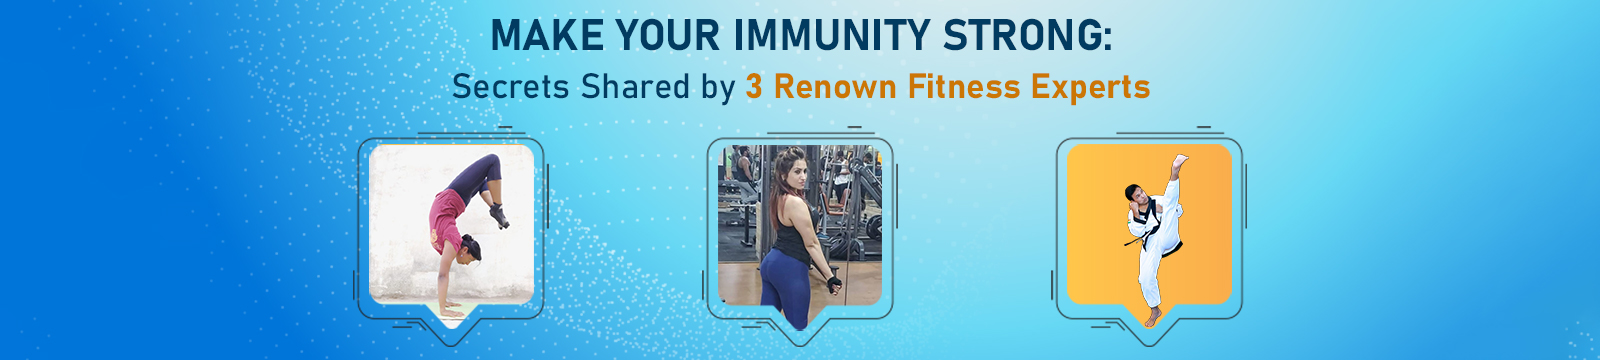 Make your Immunity Strong: Secrets Shared by 3 Renown Fitness Experts of Tricity